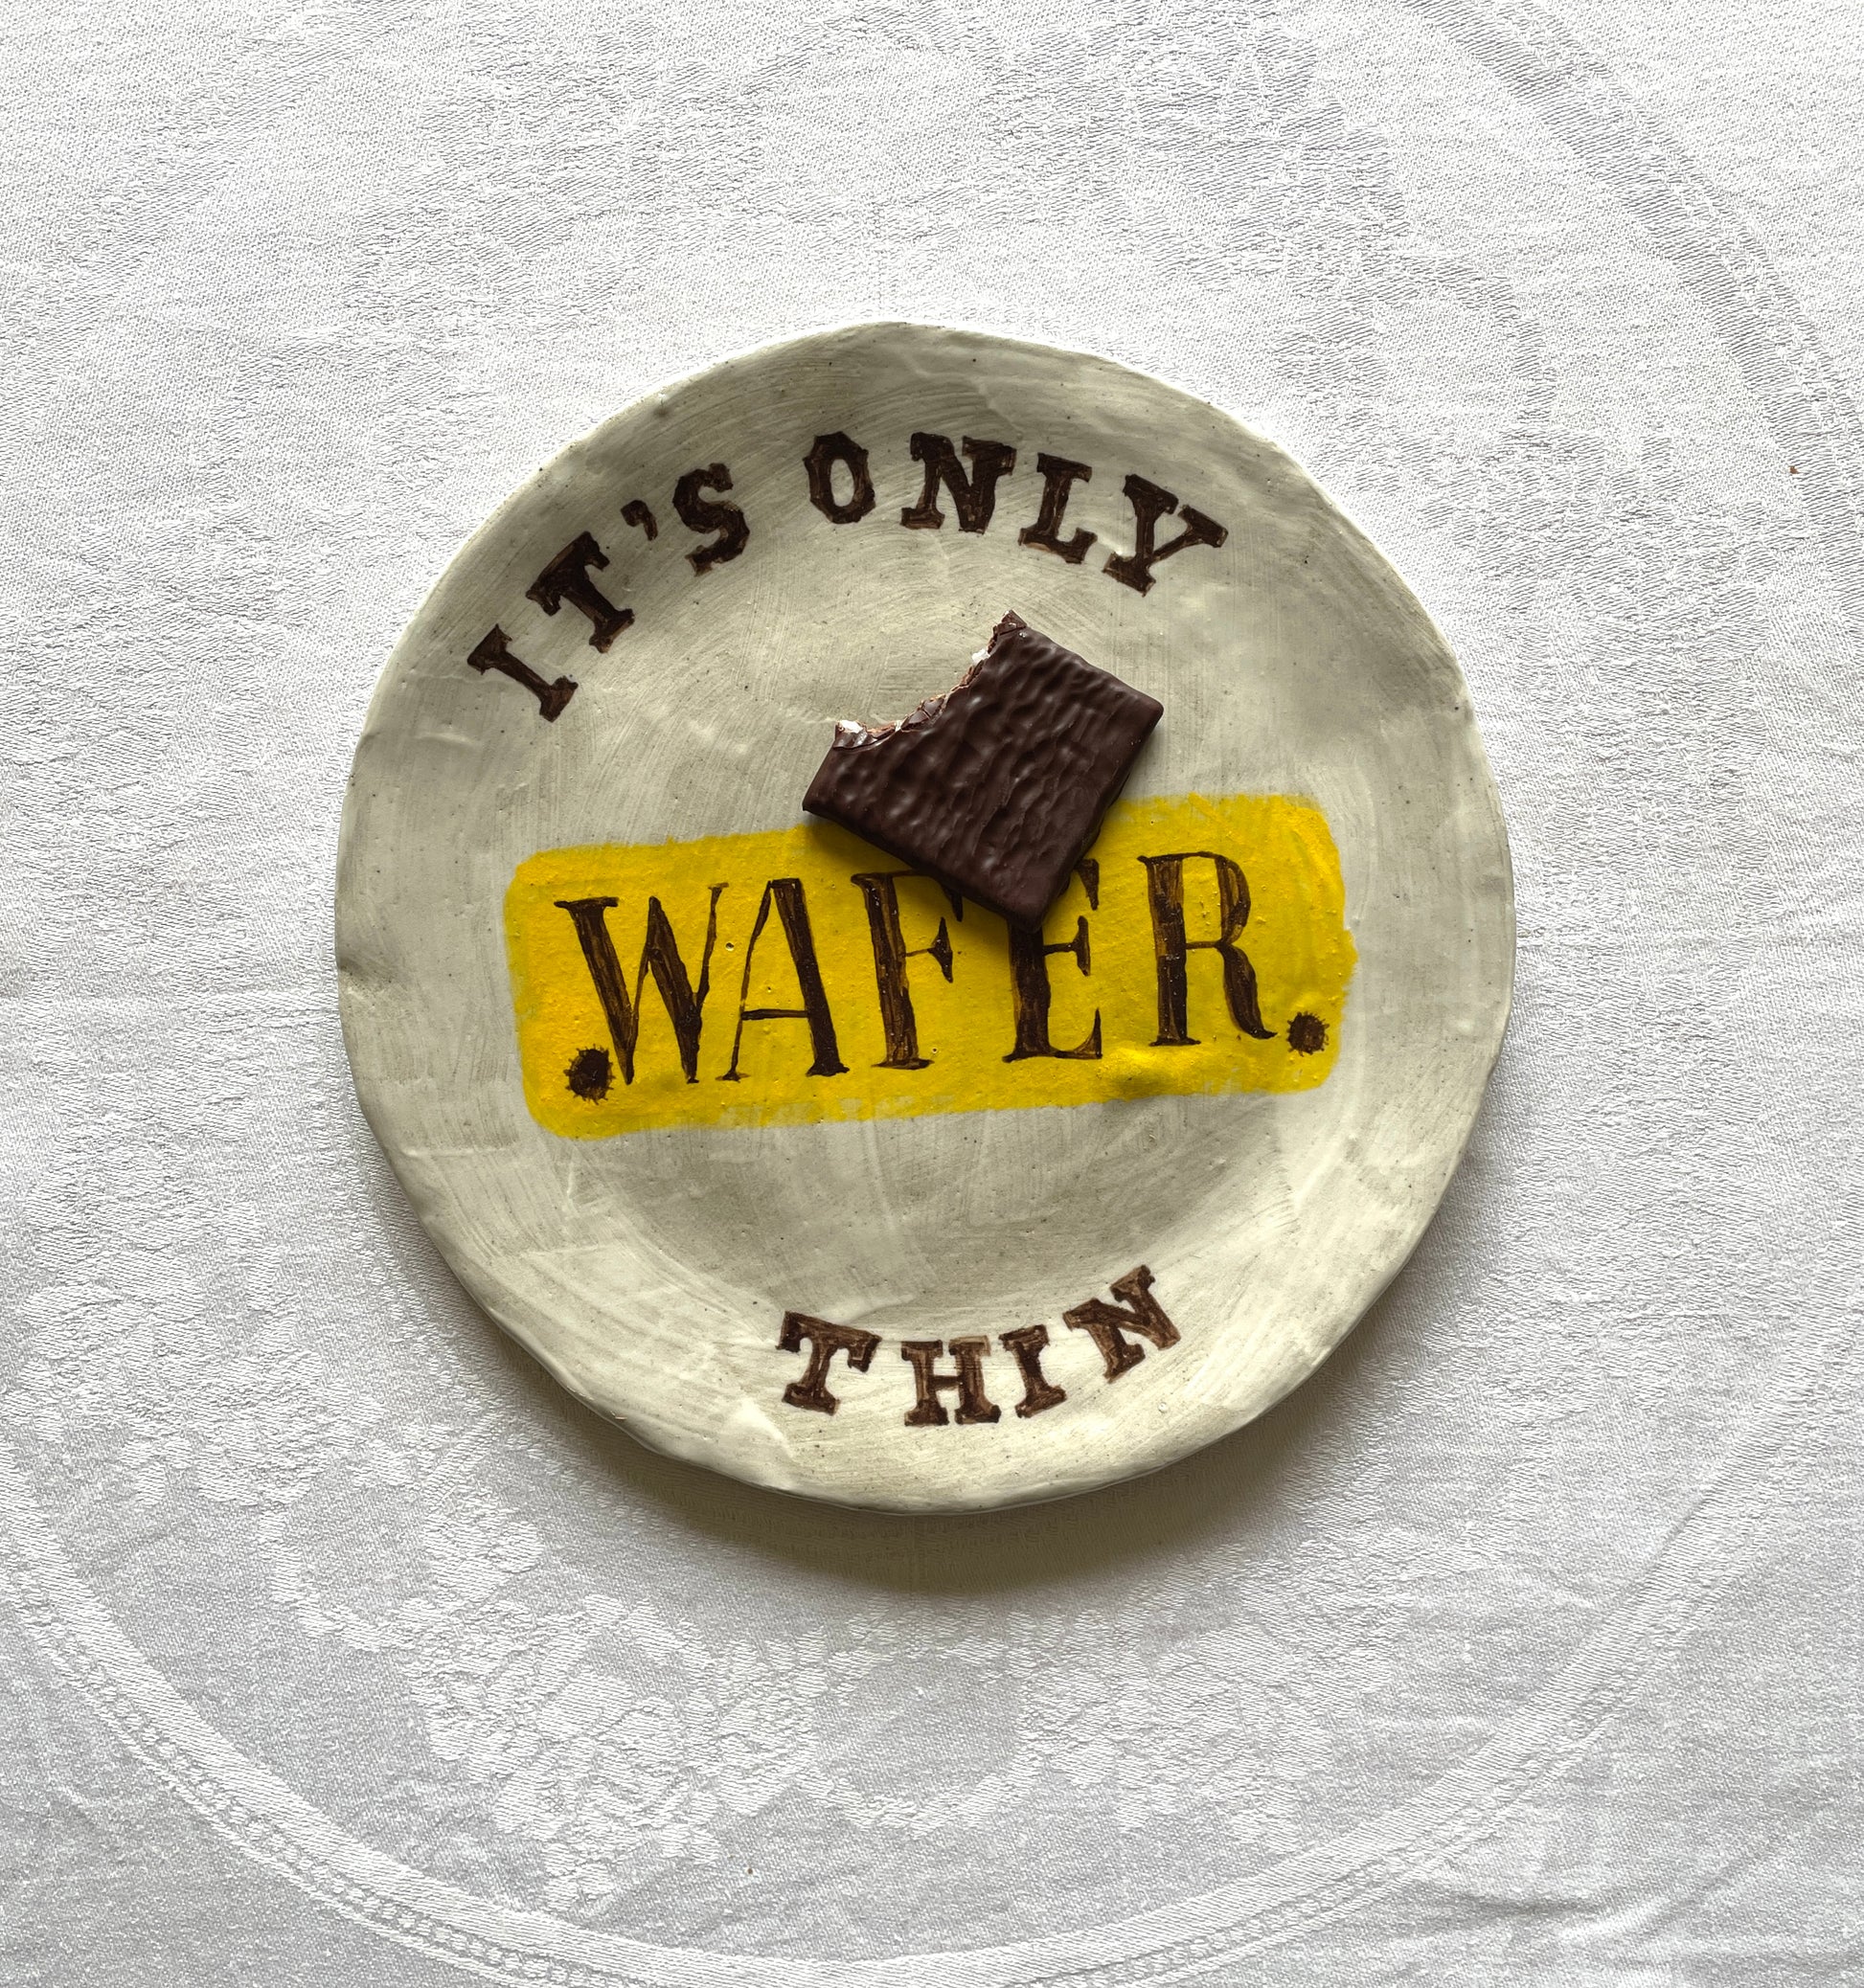 Monty Python – 'It's Only Wafer Thin' Plate and wafer